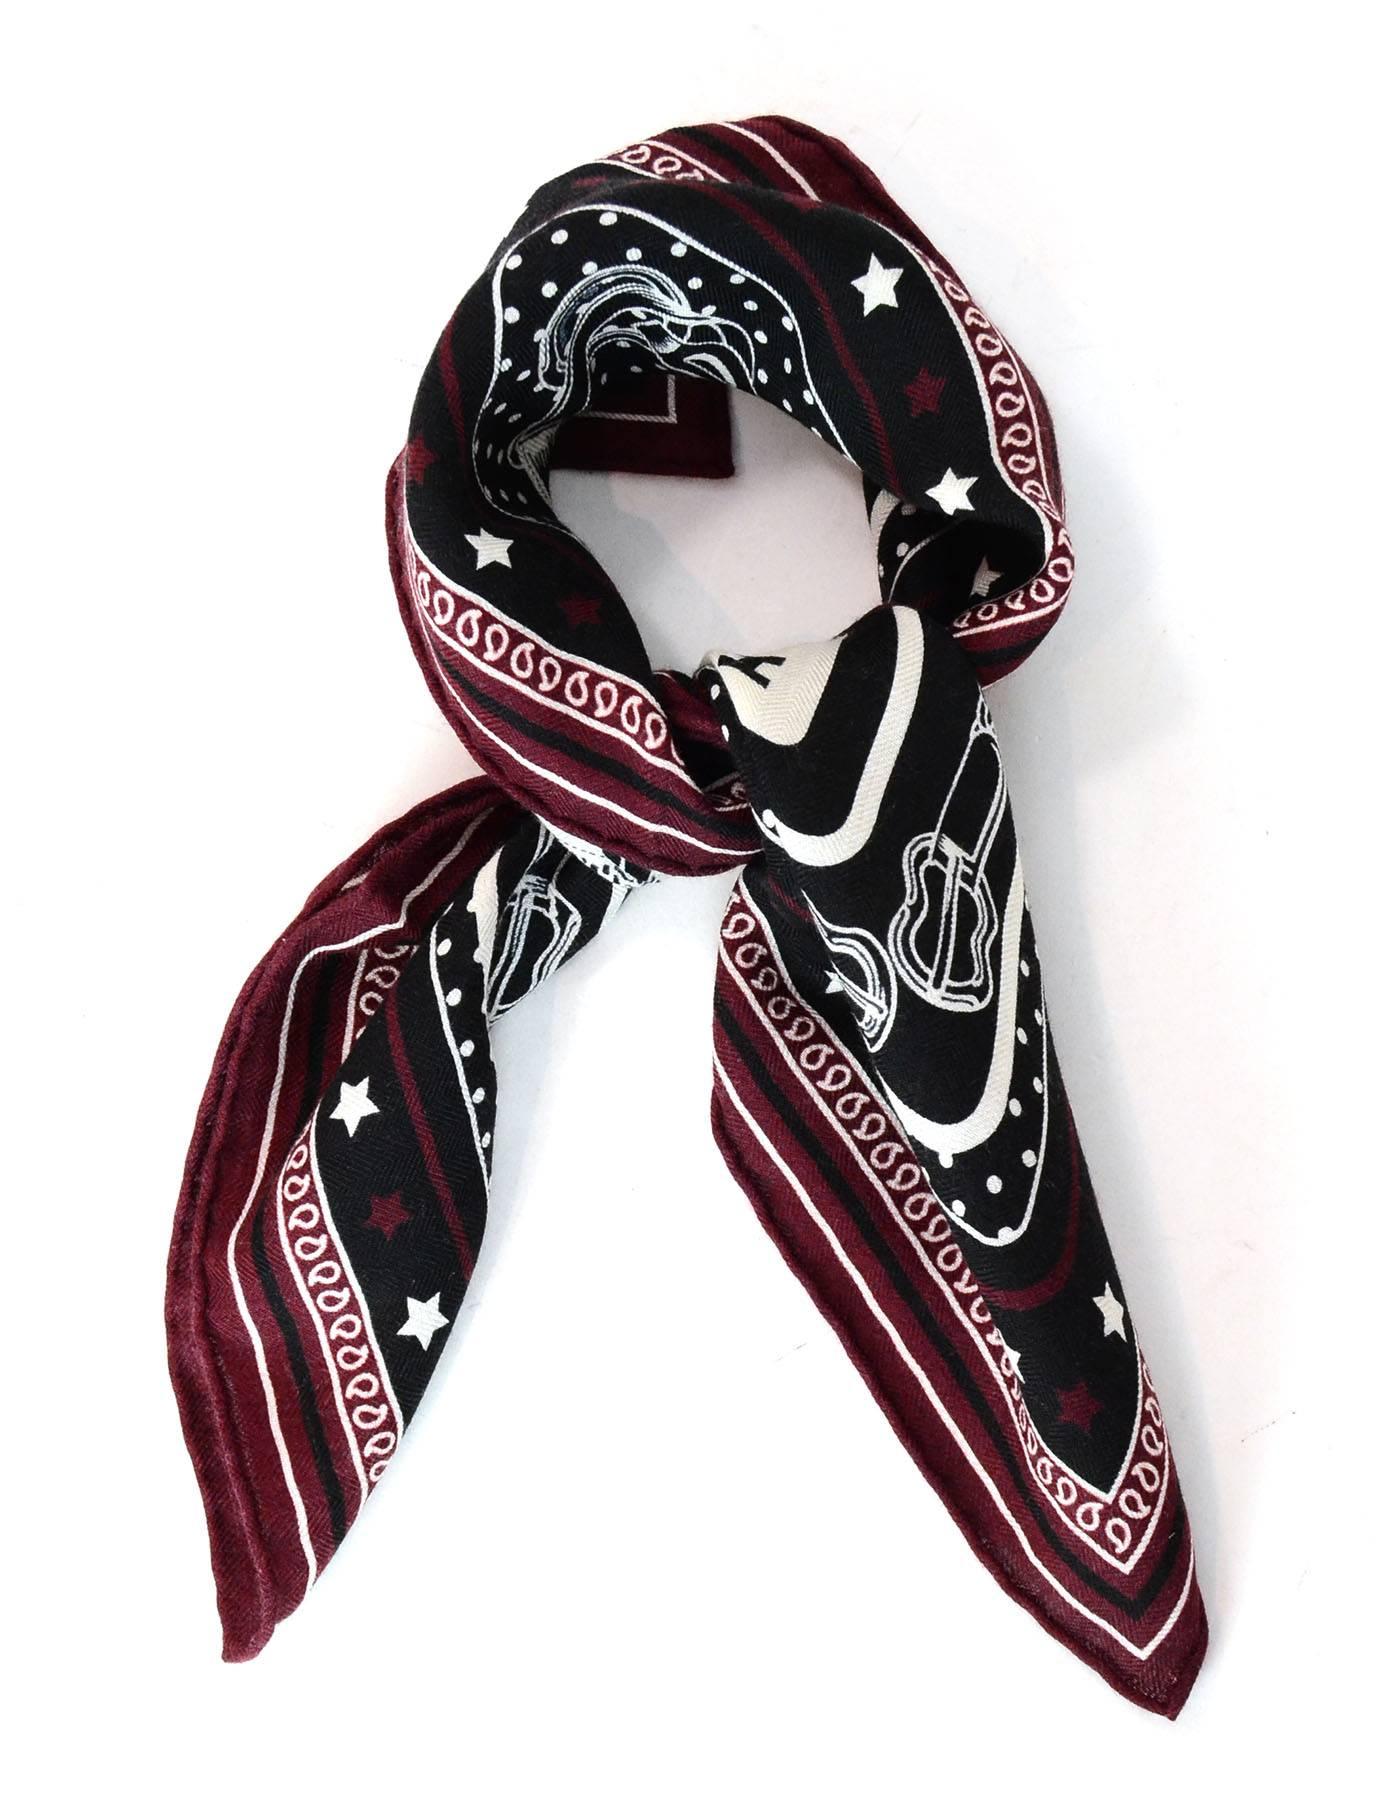 Hermes Coaching Bandana Cashmere & Silk 55cm Scarf NIB

Made In: France
Color: Black, burgundy
Composition: 70% cashmere, 30% silk
Retail Price: $260 + tax
Overall Condition: Excellent pre-owned condition - NIB
Included: Hermes box,